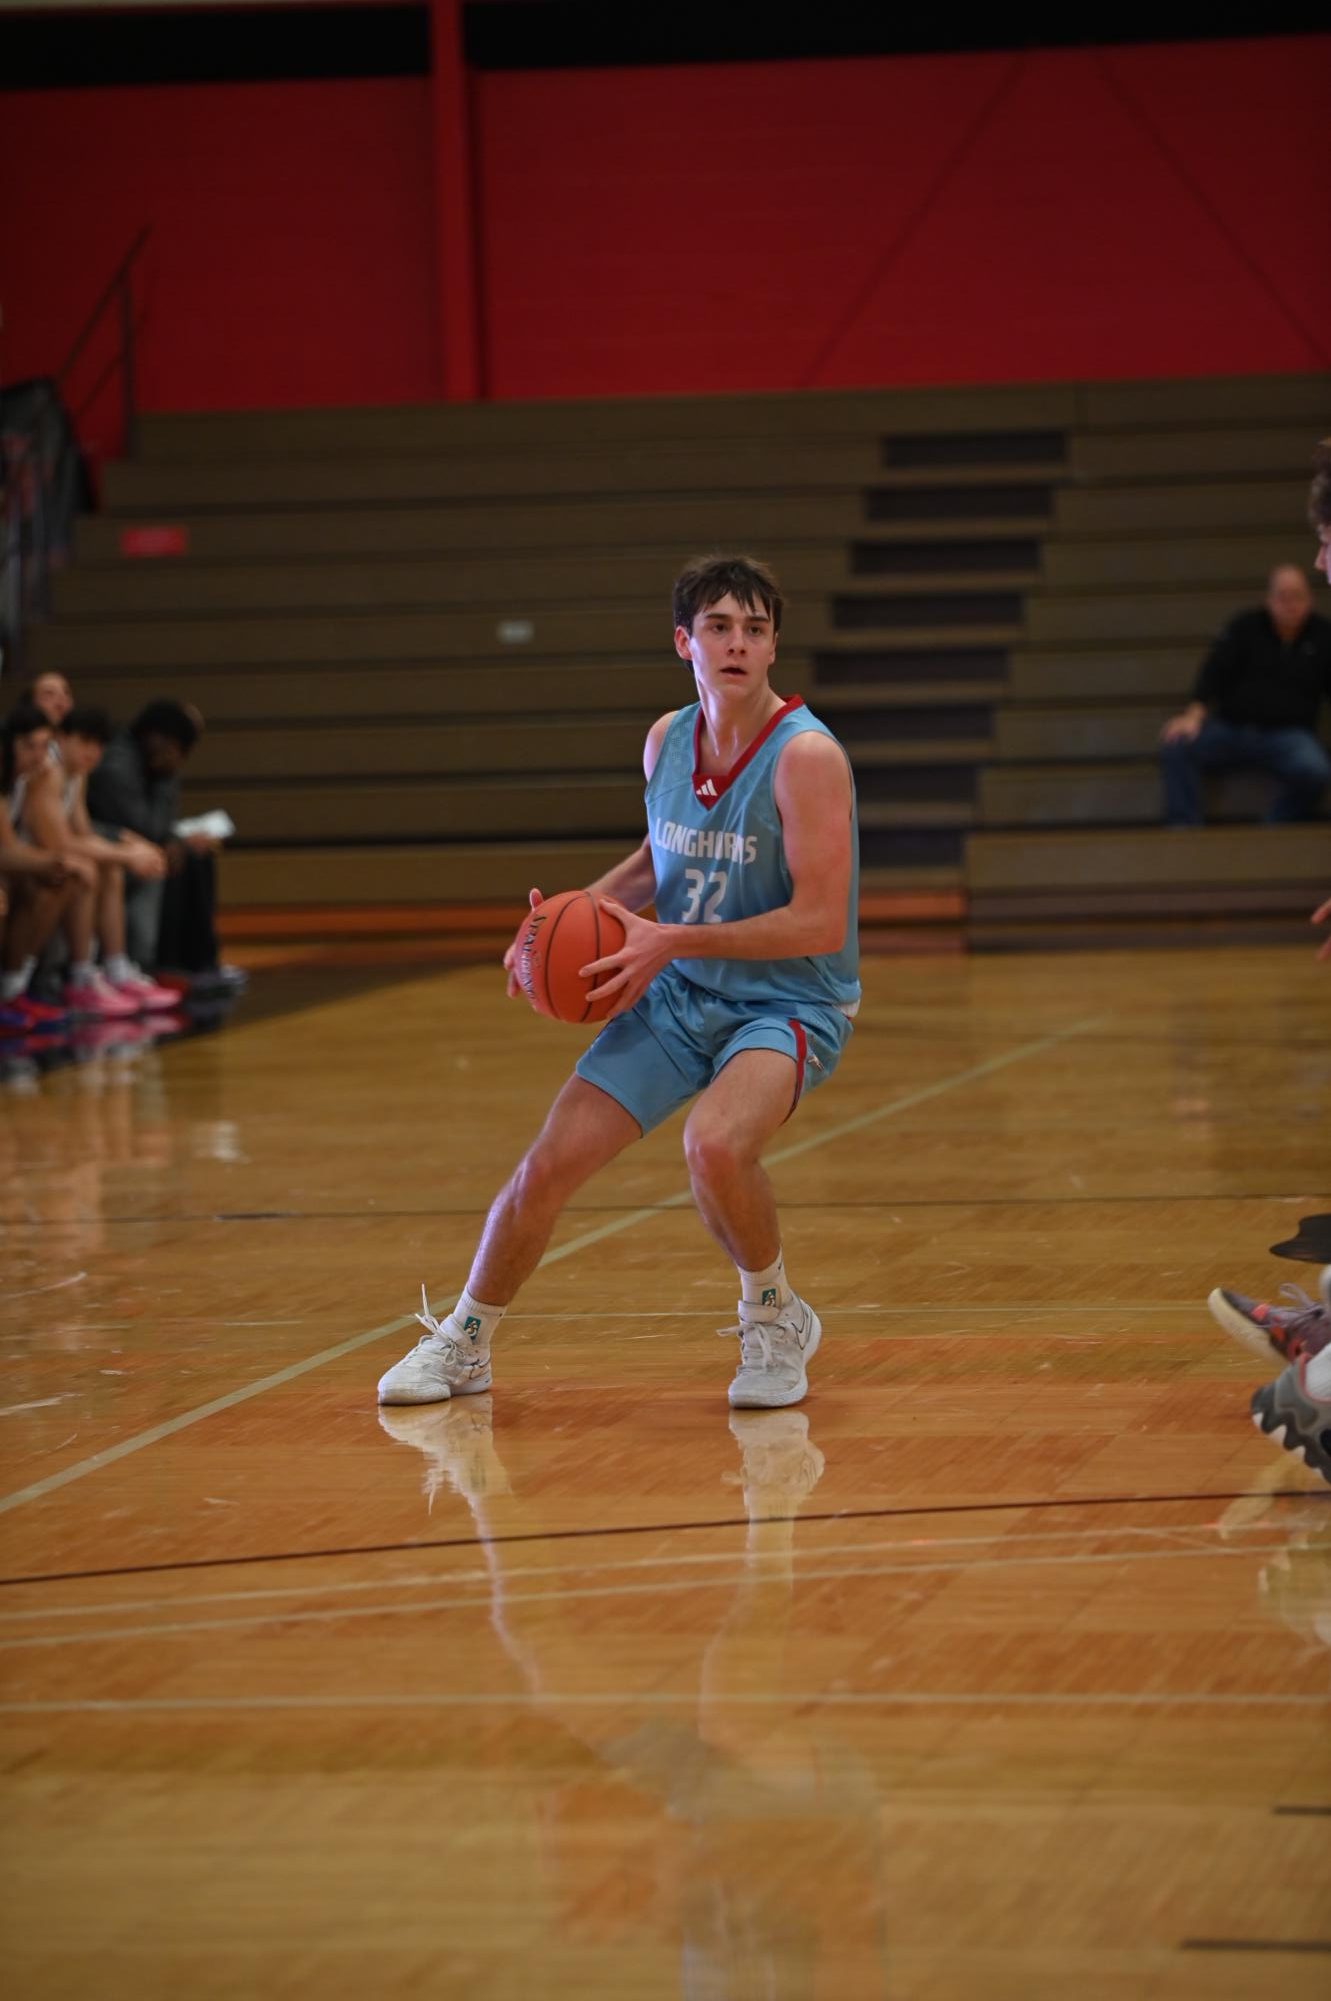 Junior Tyler (Ty) Keuhl analyzes the defense before making his move. Keuhl has been in the Longhorn Basketball Program his entire time in highschool and has started on each team he has been on. “If we play together as a team, then we will have a lot of success,” Keuhl said.
